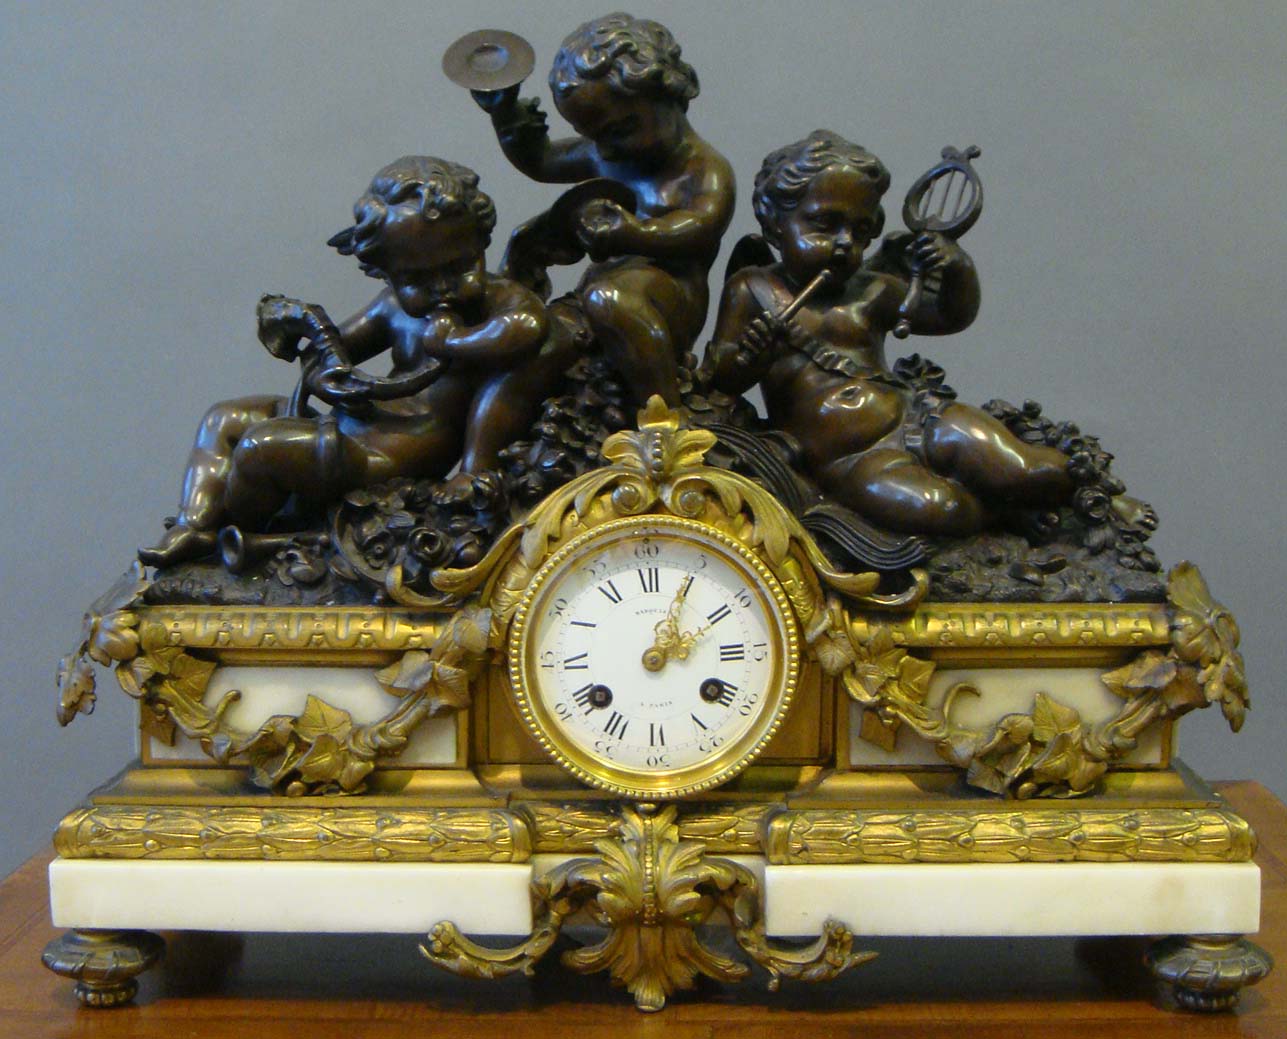 A 19th century French Louis XV style bronze, ormolu, and alabaster figural mantel clock by Marquis a